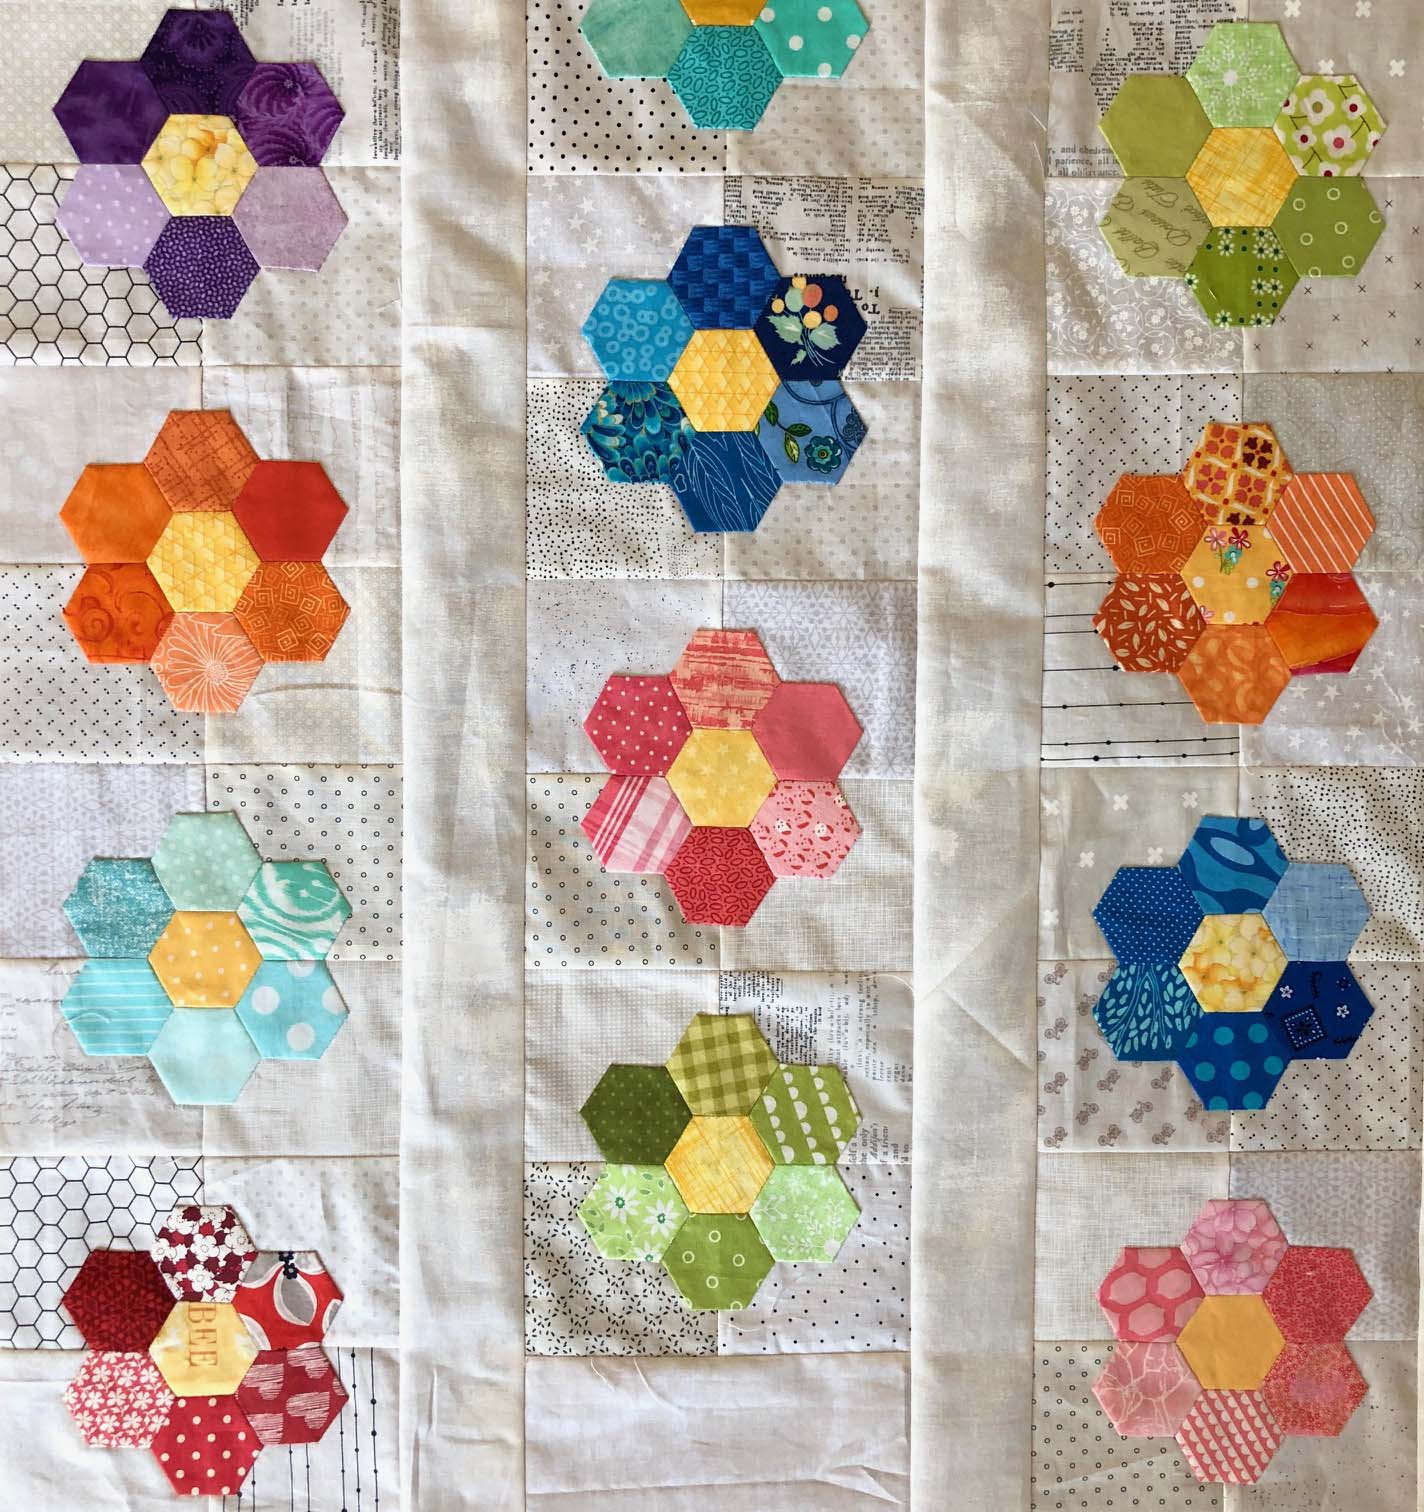 Grandmother's Flower Garden blocks made by Julie @ The Crafty Quilter.  This pattern is Emma's Flower Garden by Sherri McConnell.